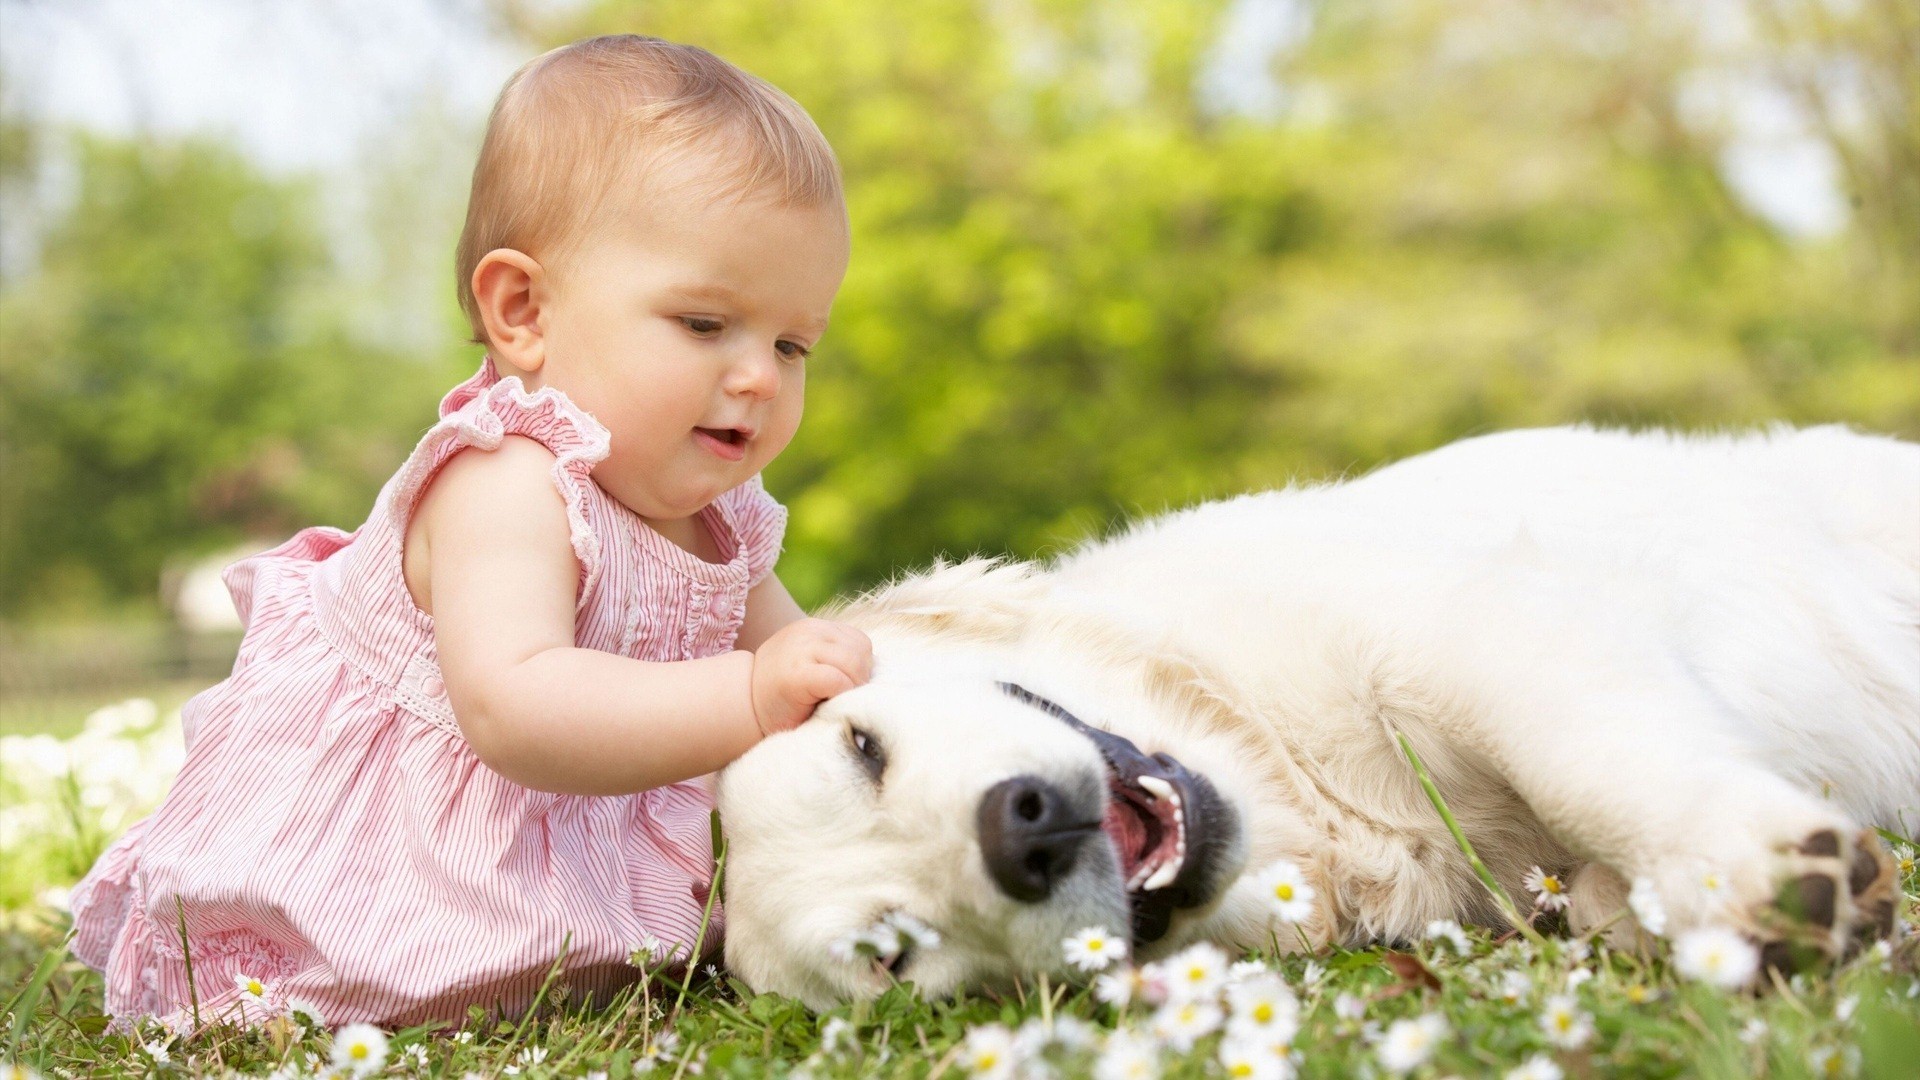 1920x1080 cute baby with dog #wallpapers